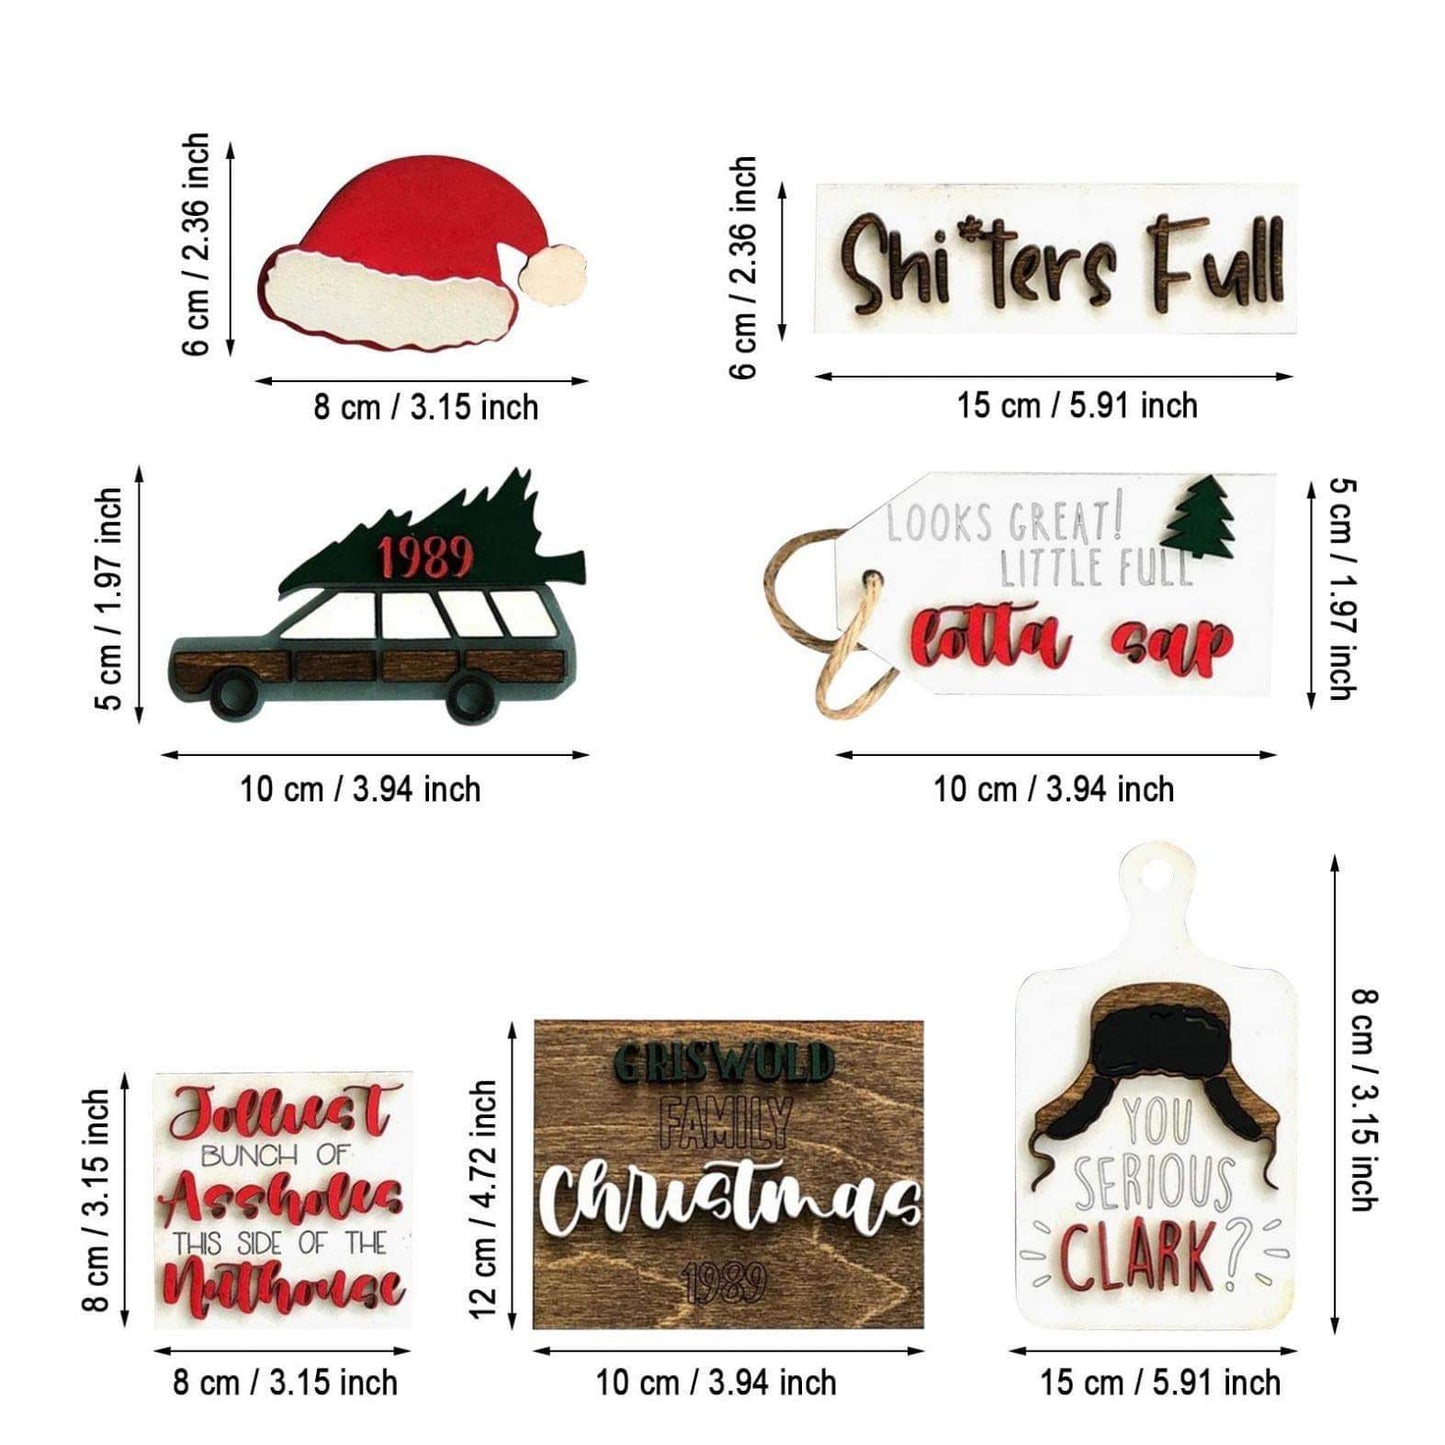 Vacation cottage plaques